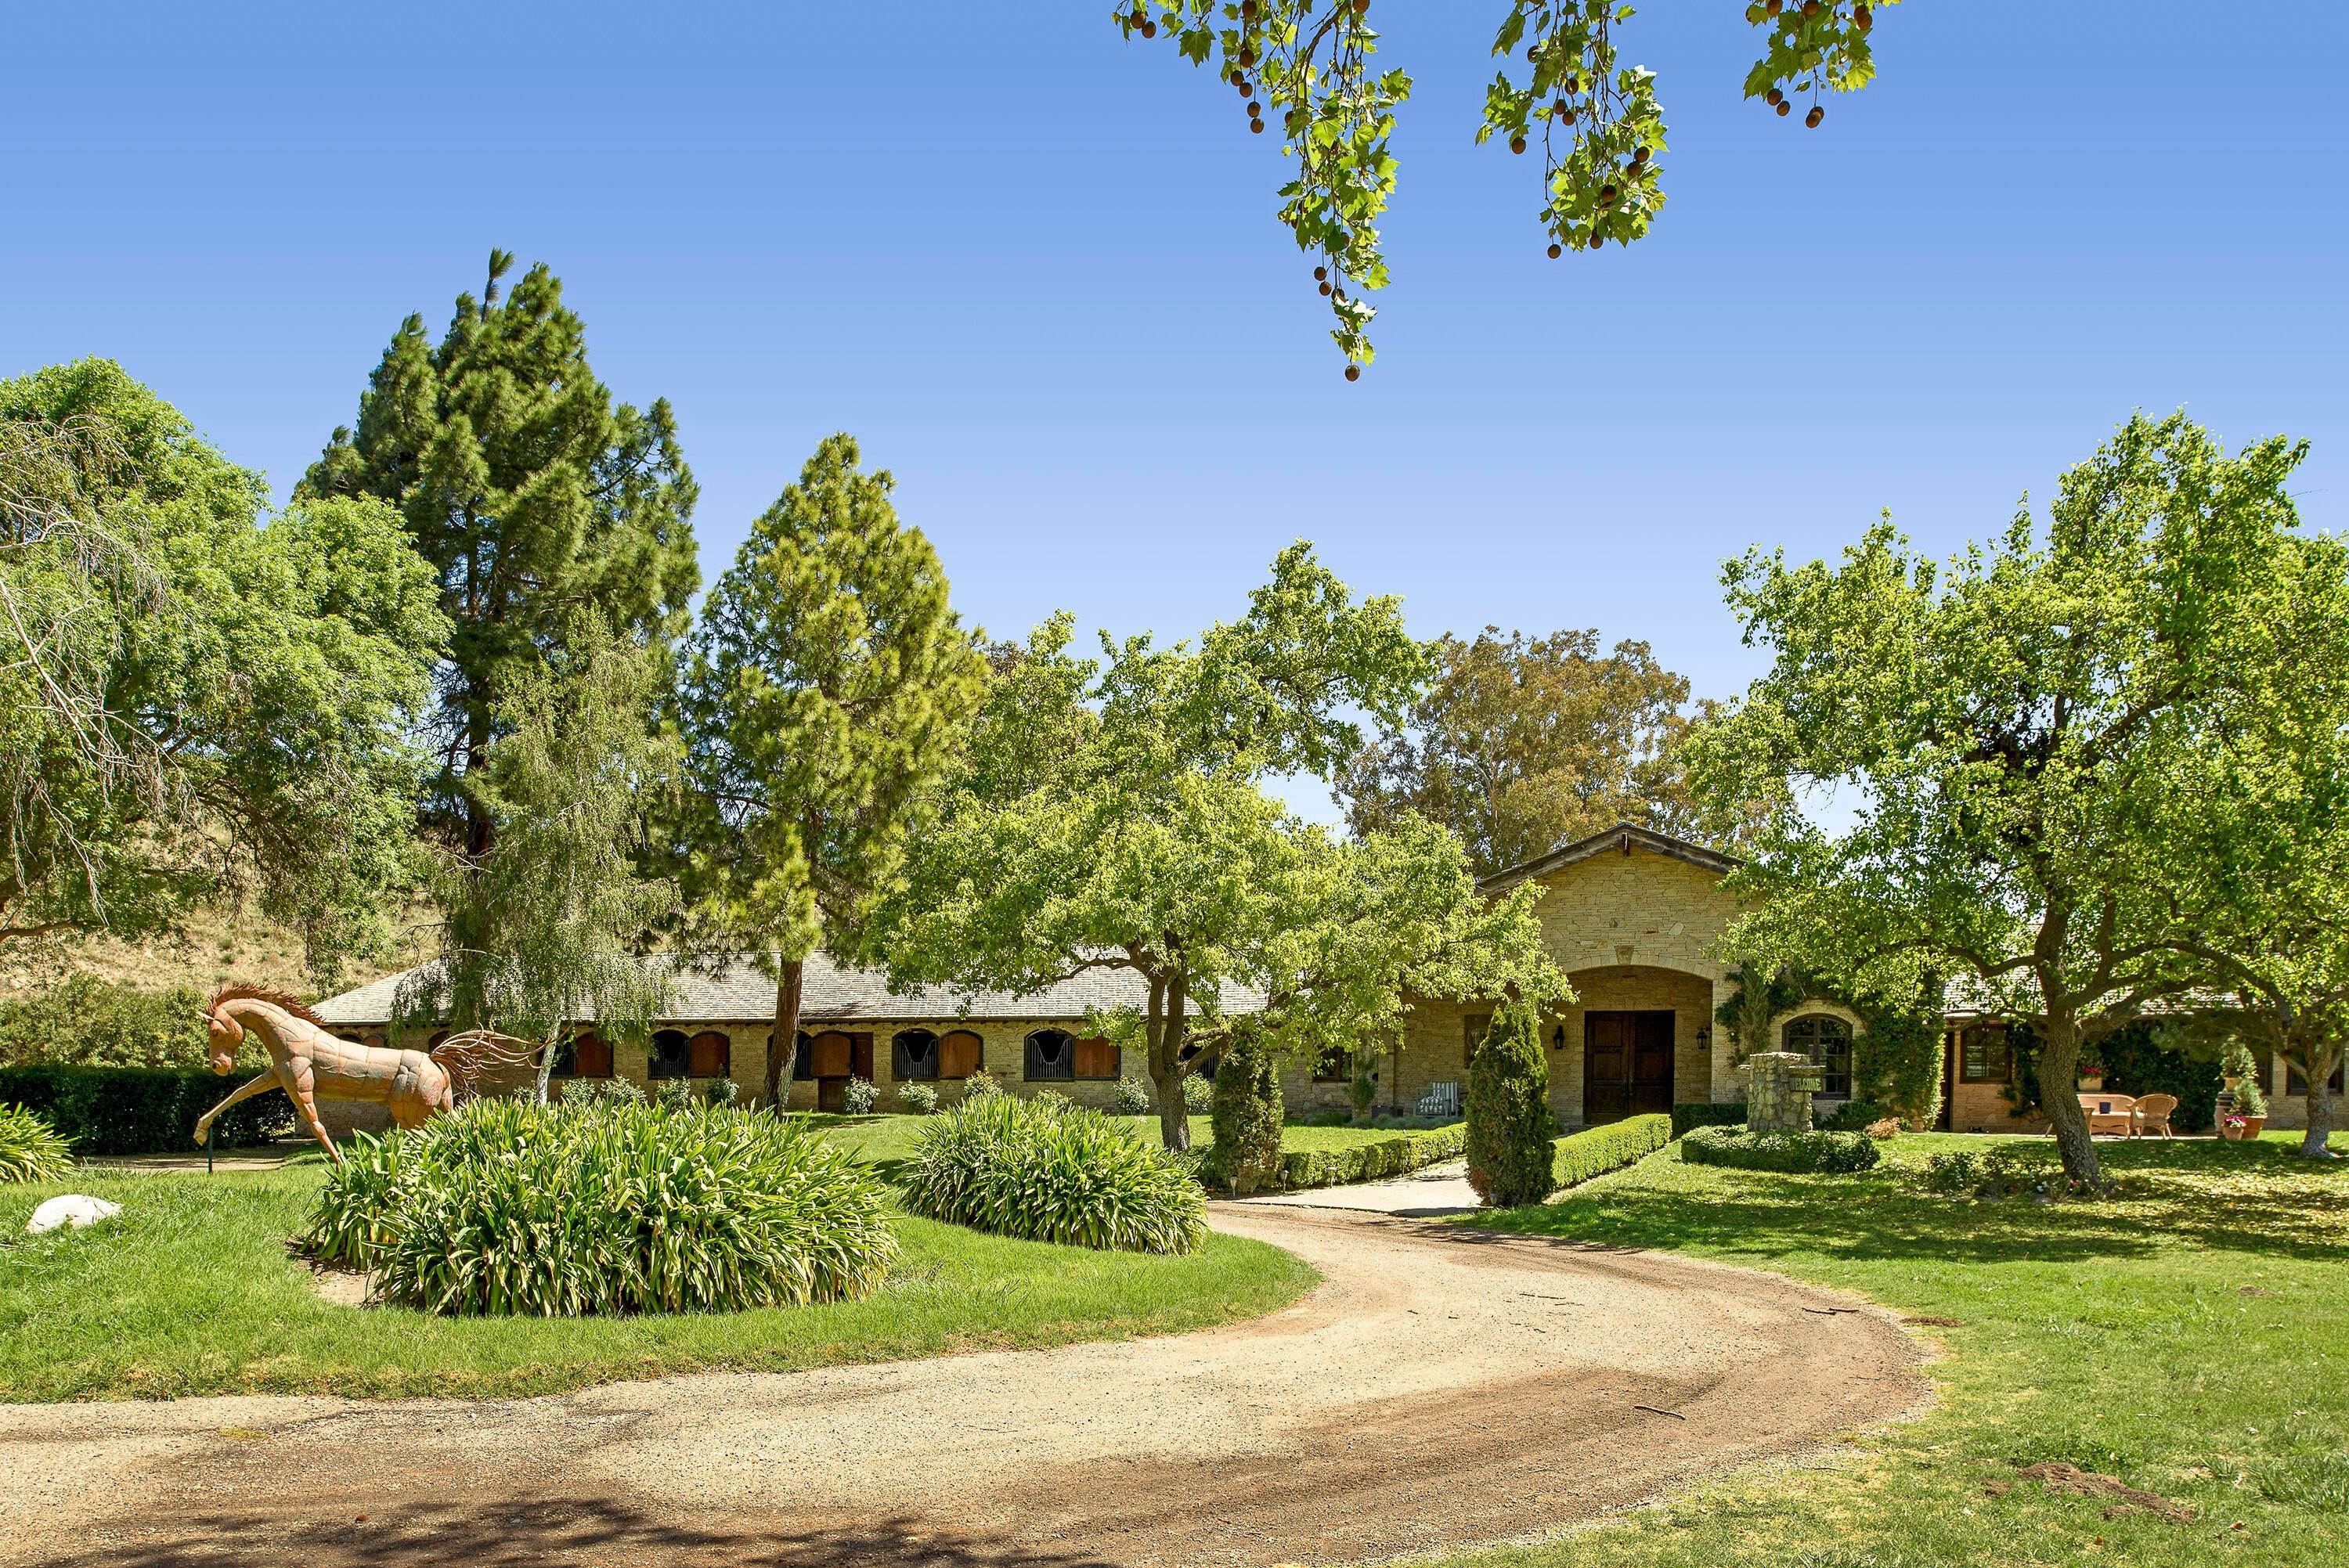 Estate for Sale at 959 E Hwy 246 Solvang, California 93463 United States